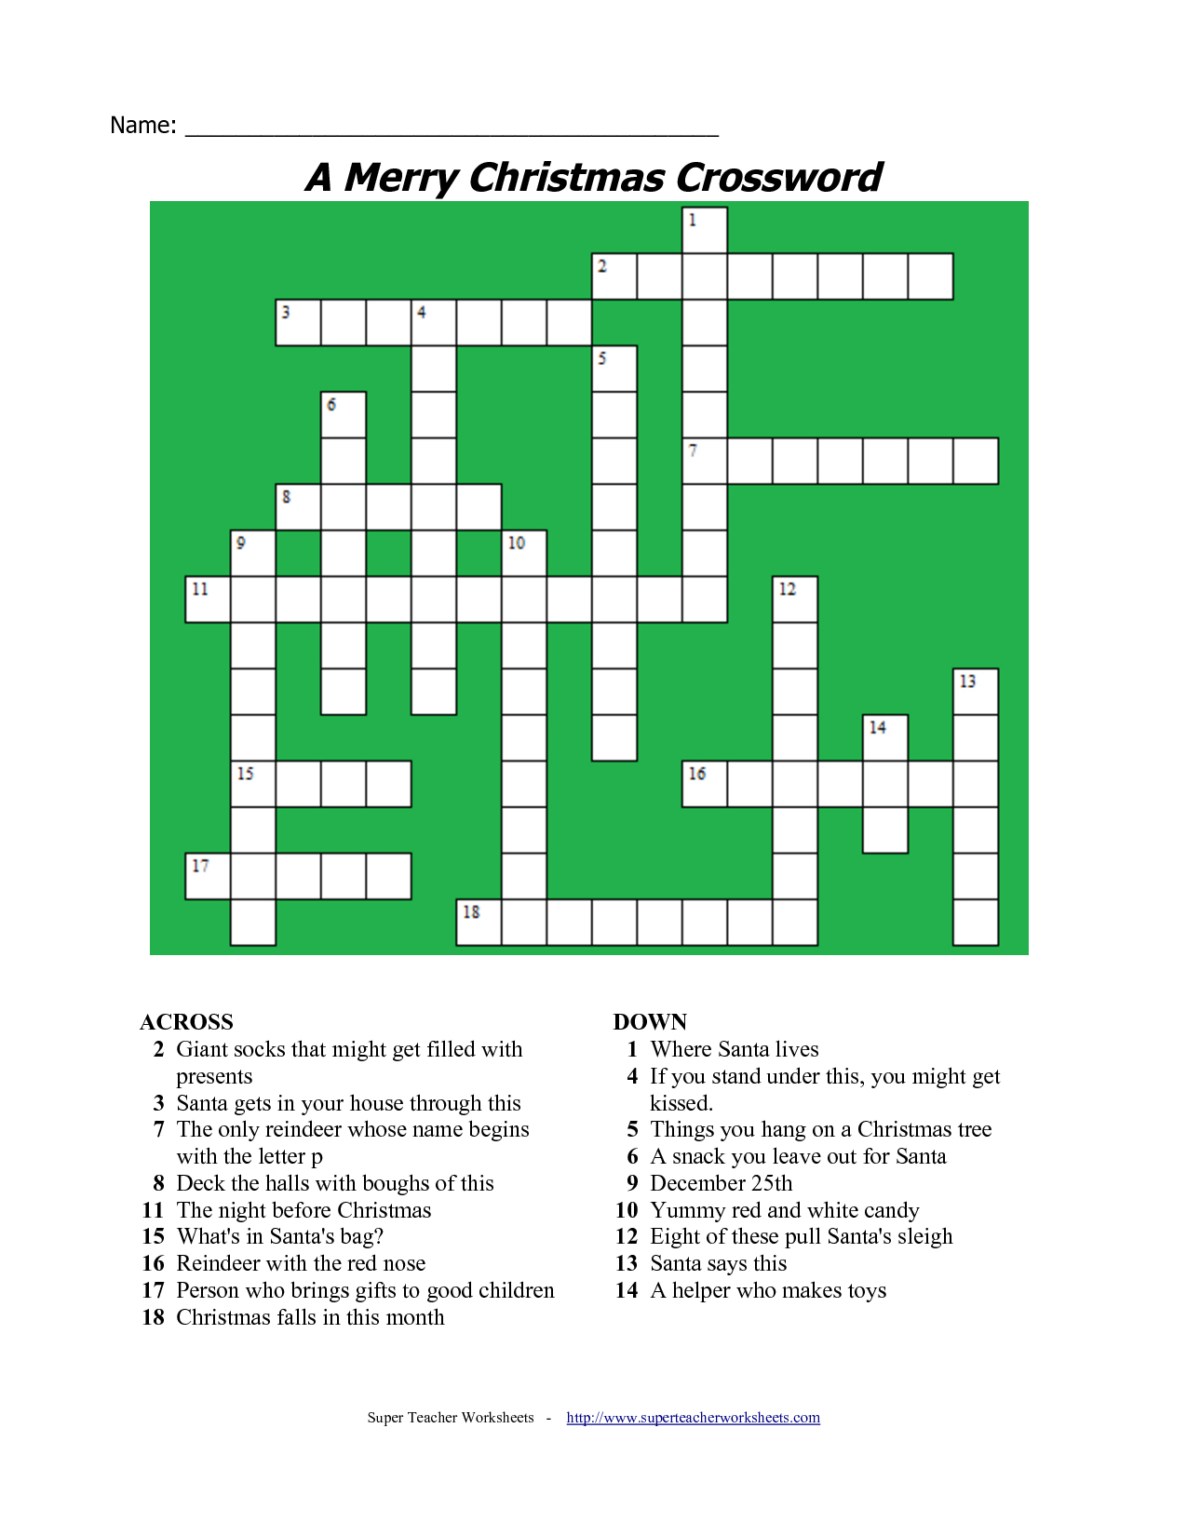 free-printable-christmas-crossword-puzzles-for-adults-free-printable